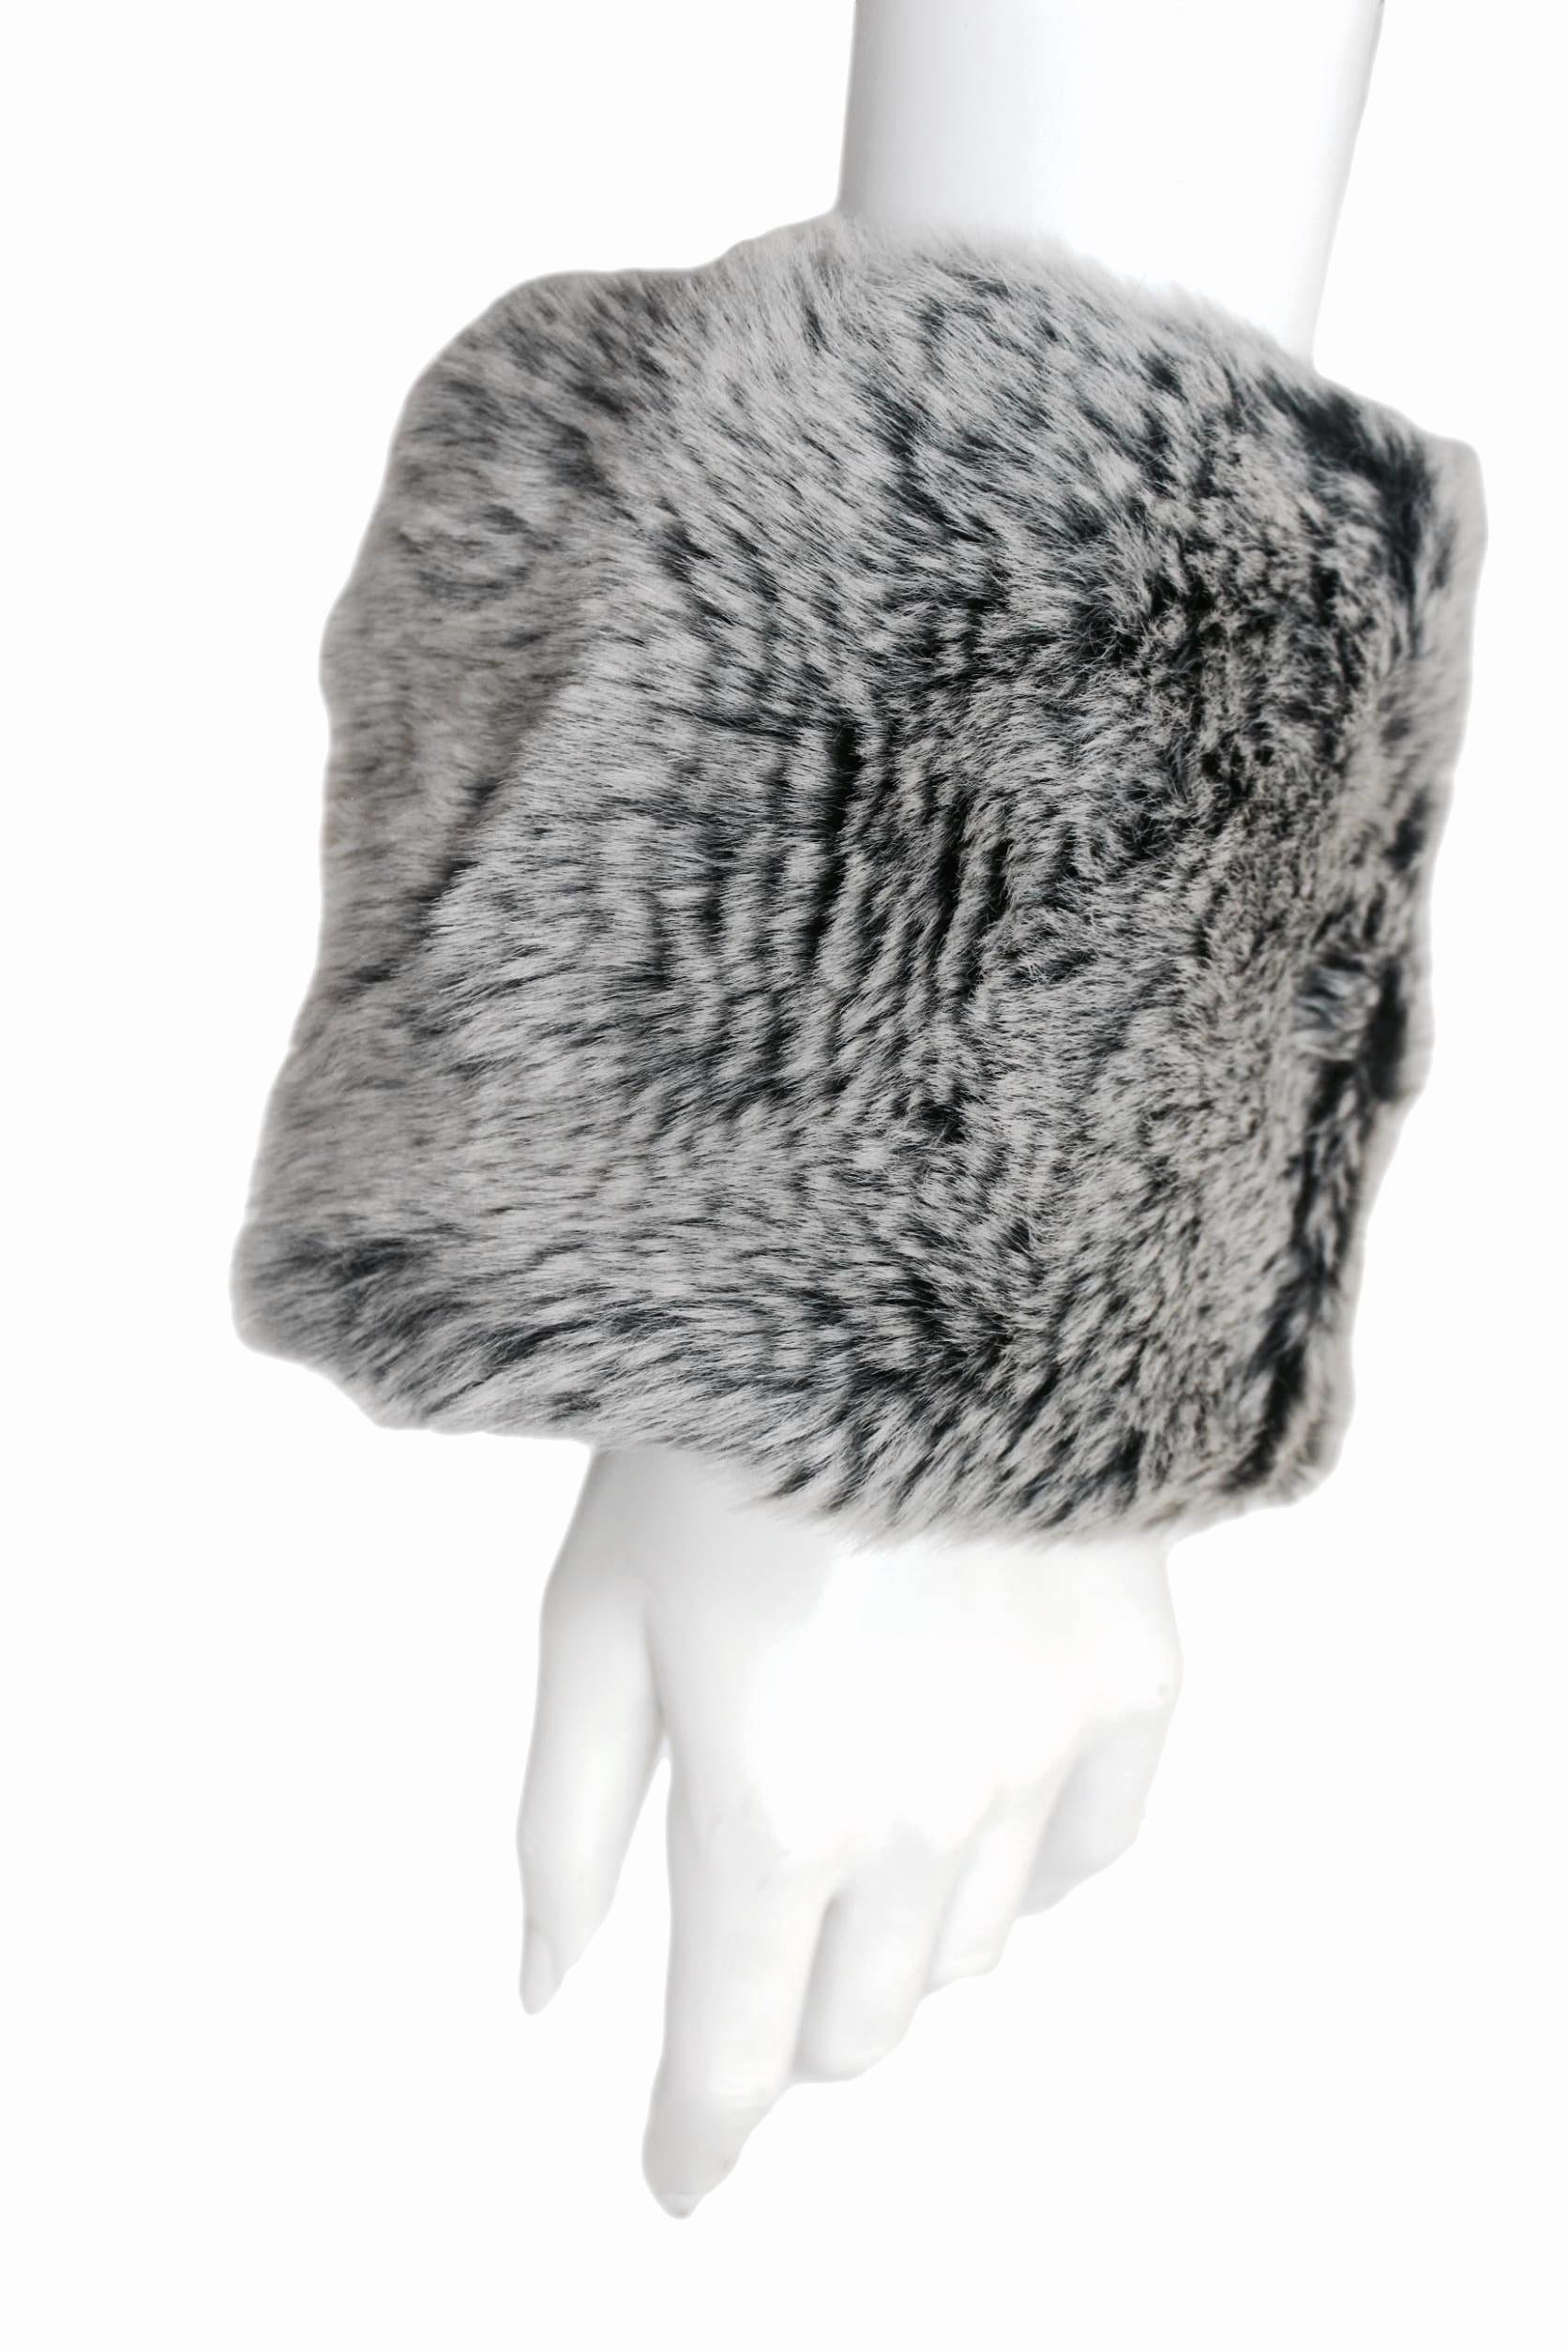 Issey Miyake Faux Fur Pleats Please Cowl and Wrist Cuff Accessories  In Excellent Condition For Sale In Bath, GB